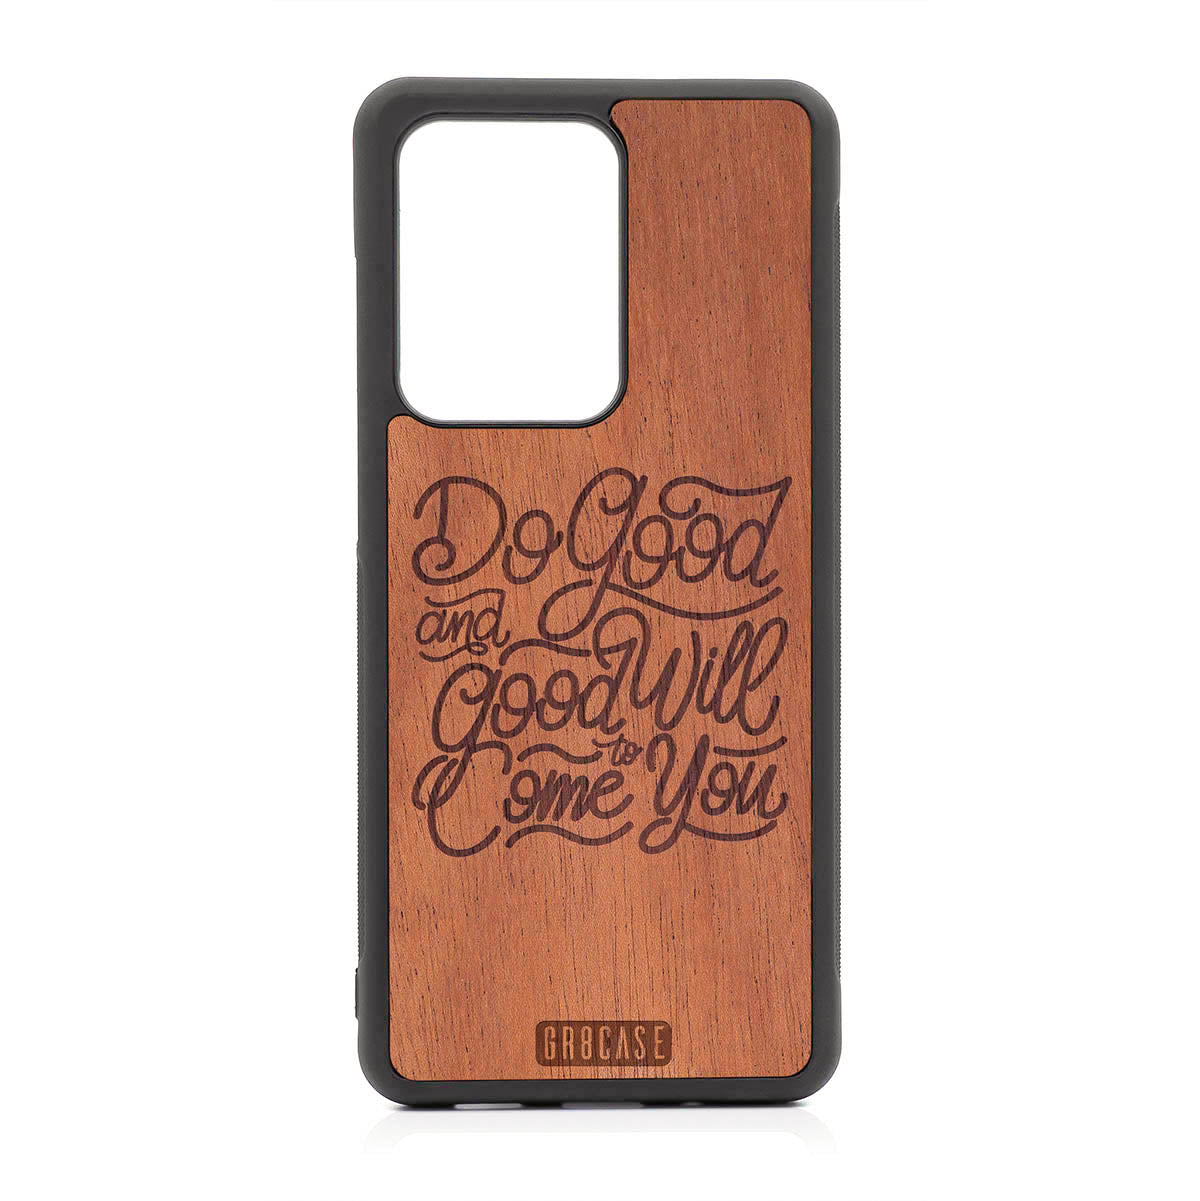 Do Good And Good Will Come To You Design Wood Case For Samsung Galaxy S20 Ultra by GR8CASE